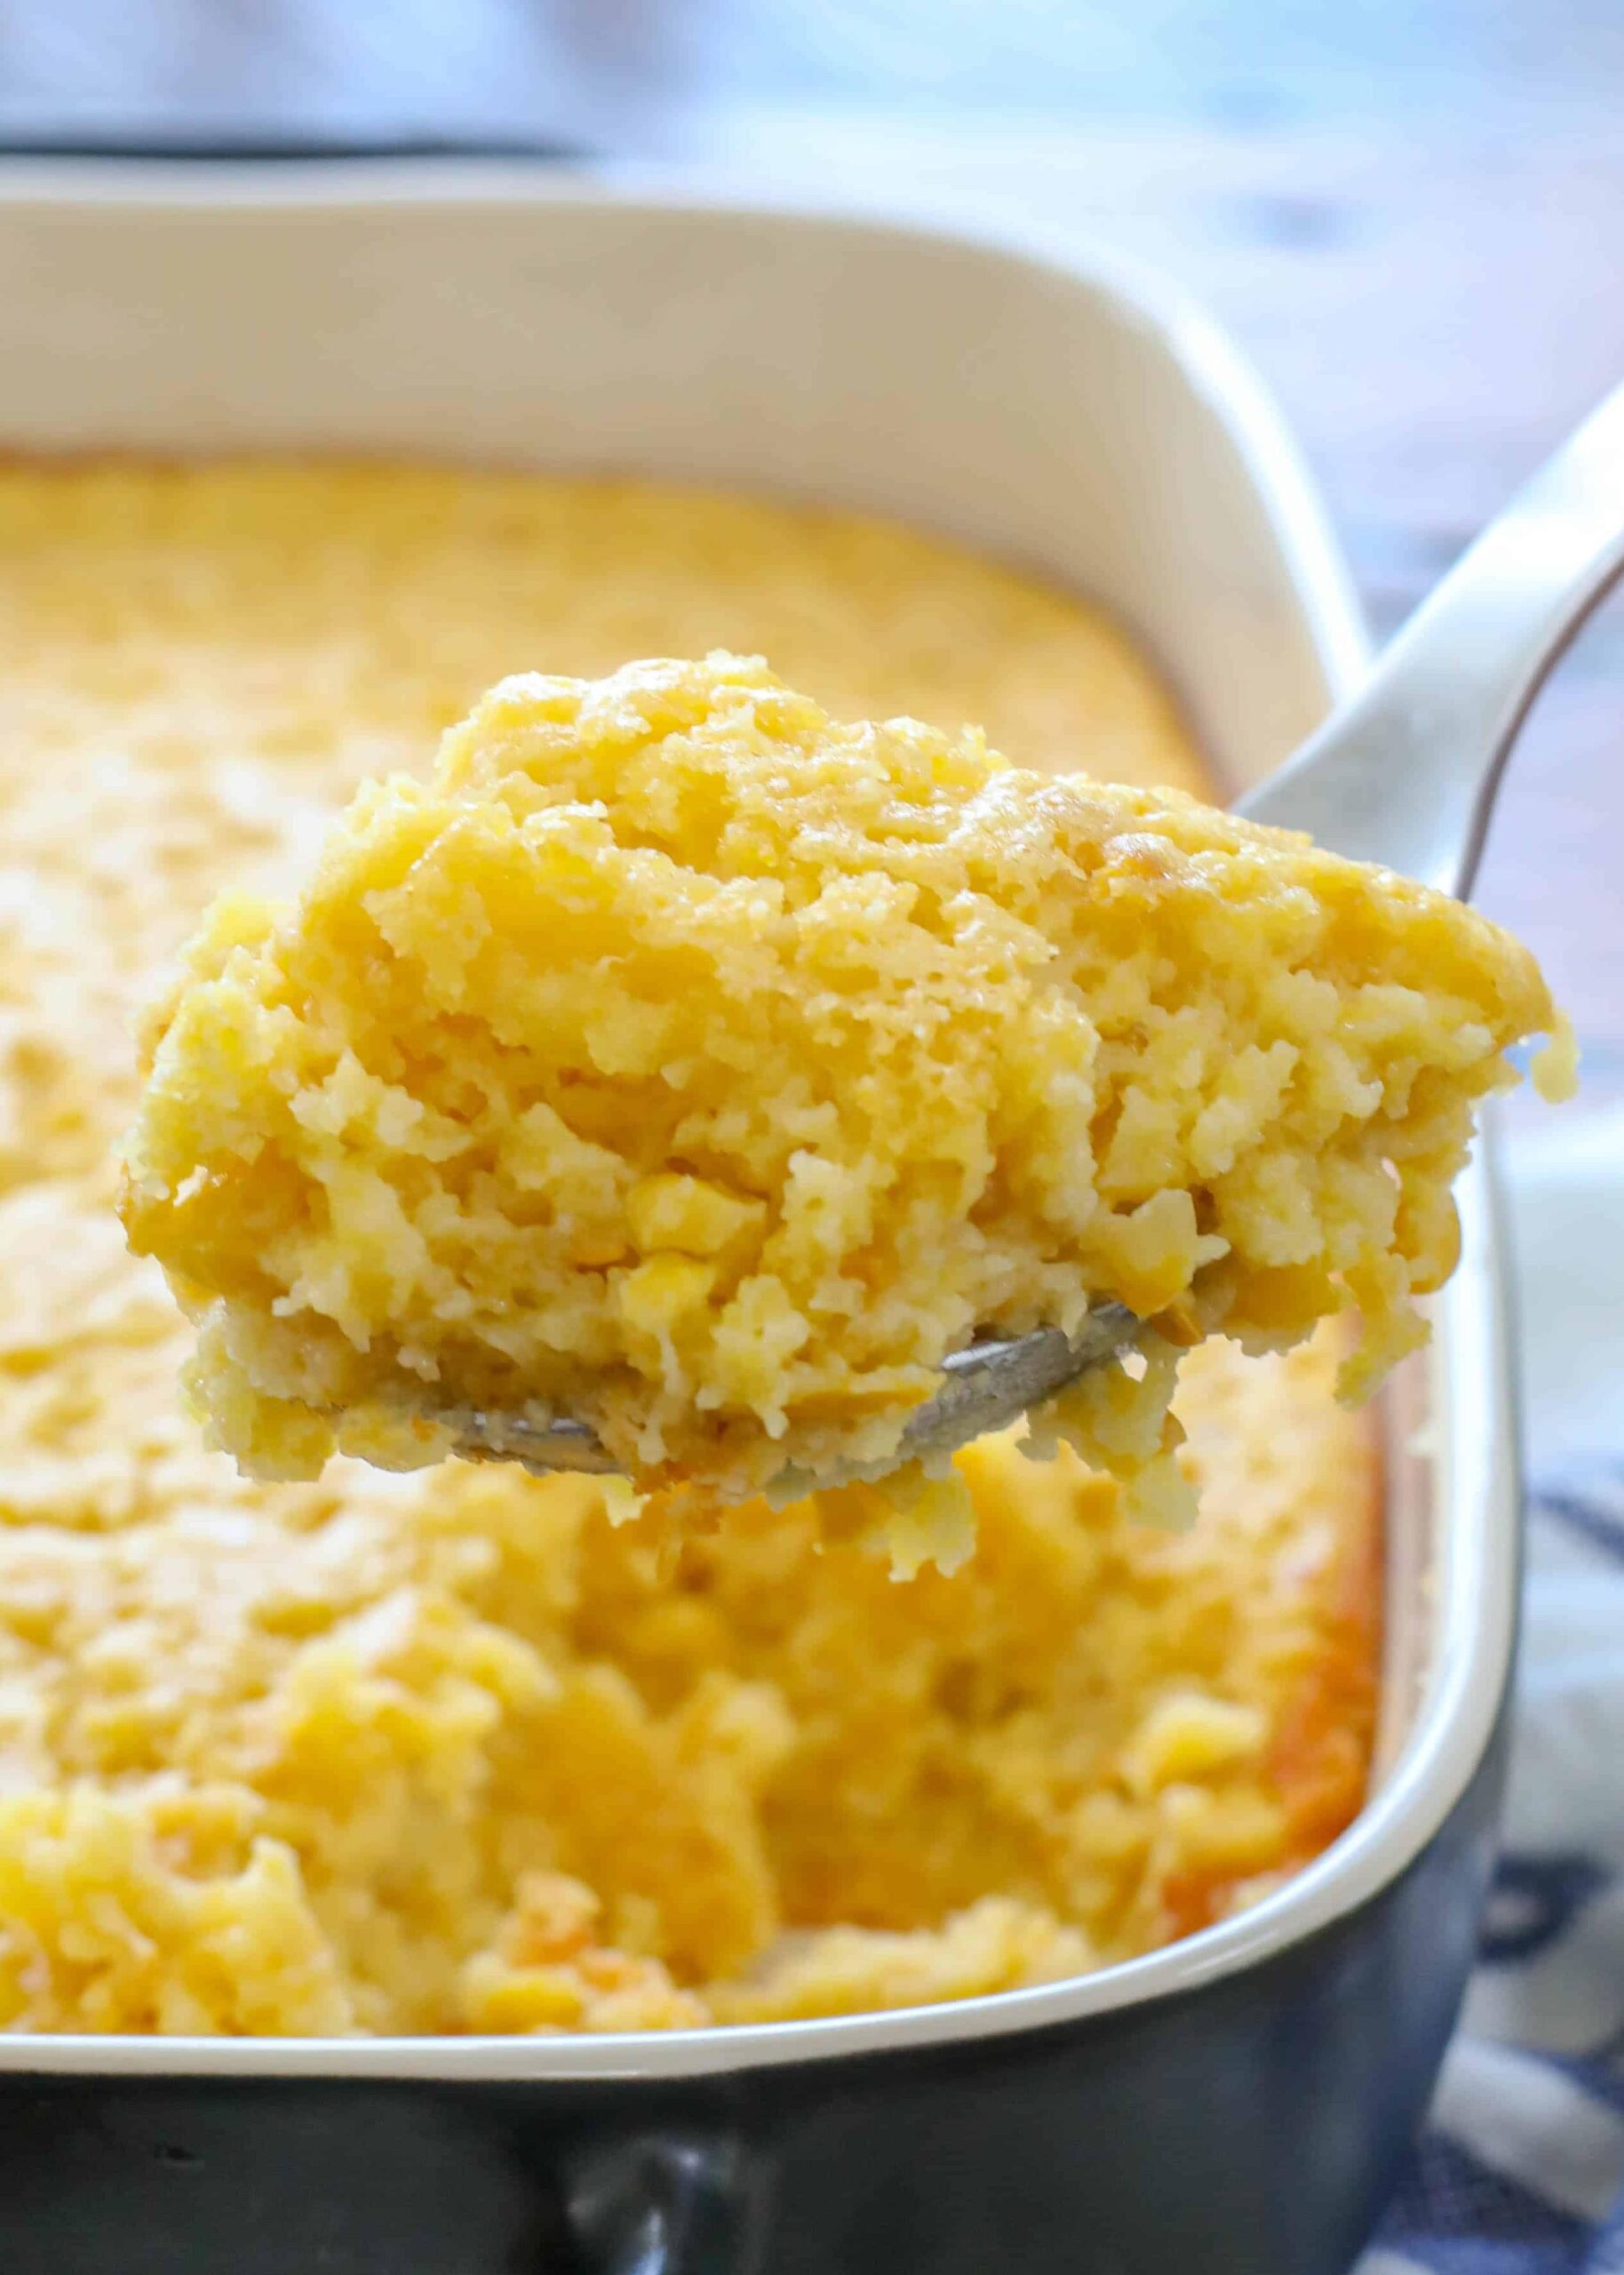  Can you smell the sweet aroma of Southern corn pudding?